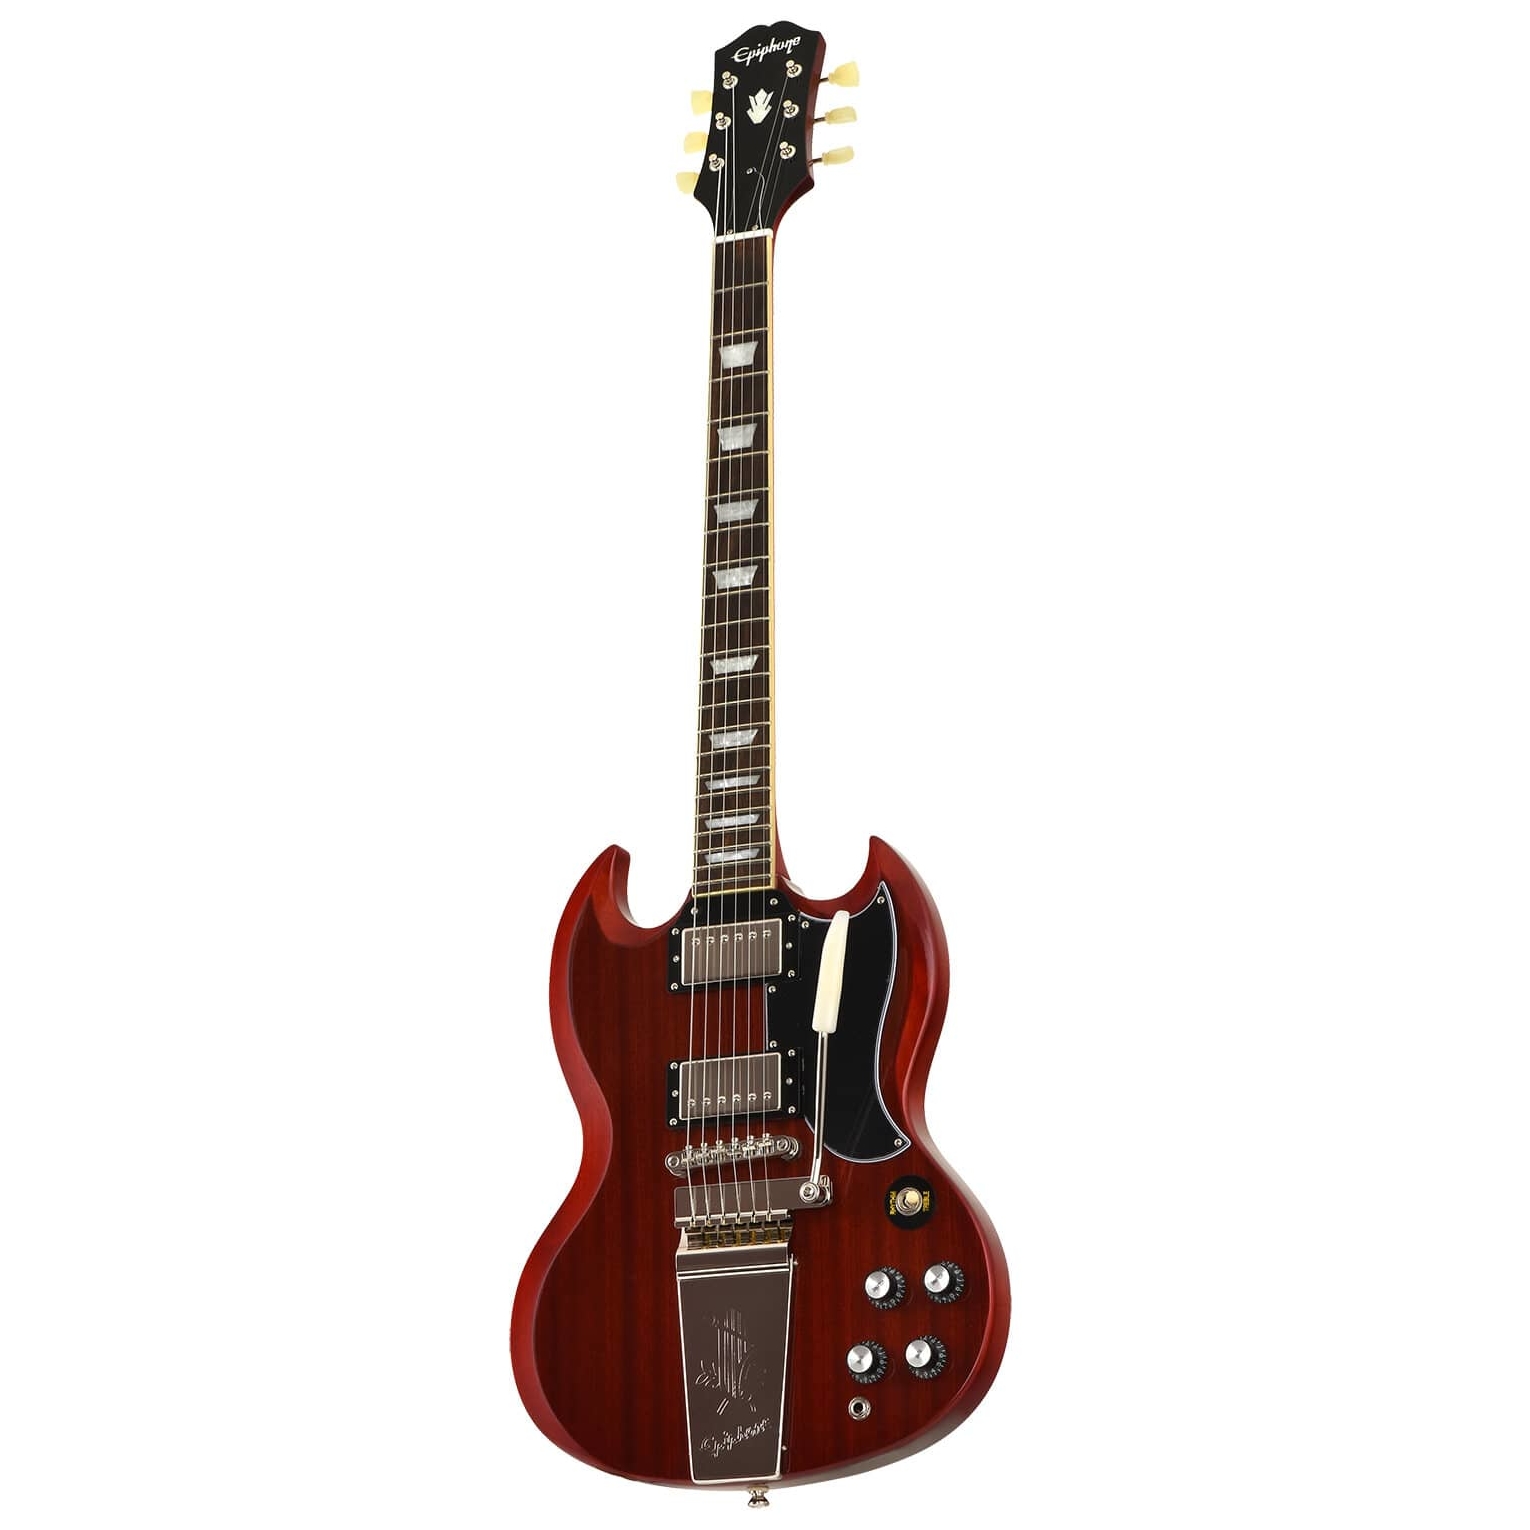 Epiphone Inspired by Gibson SG Standard 61 Maestro Vibrola